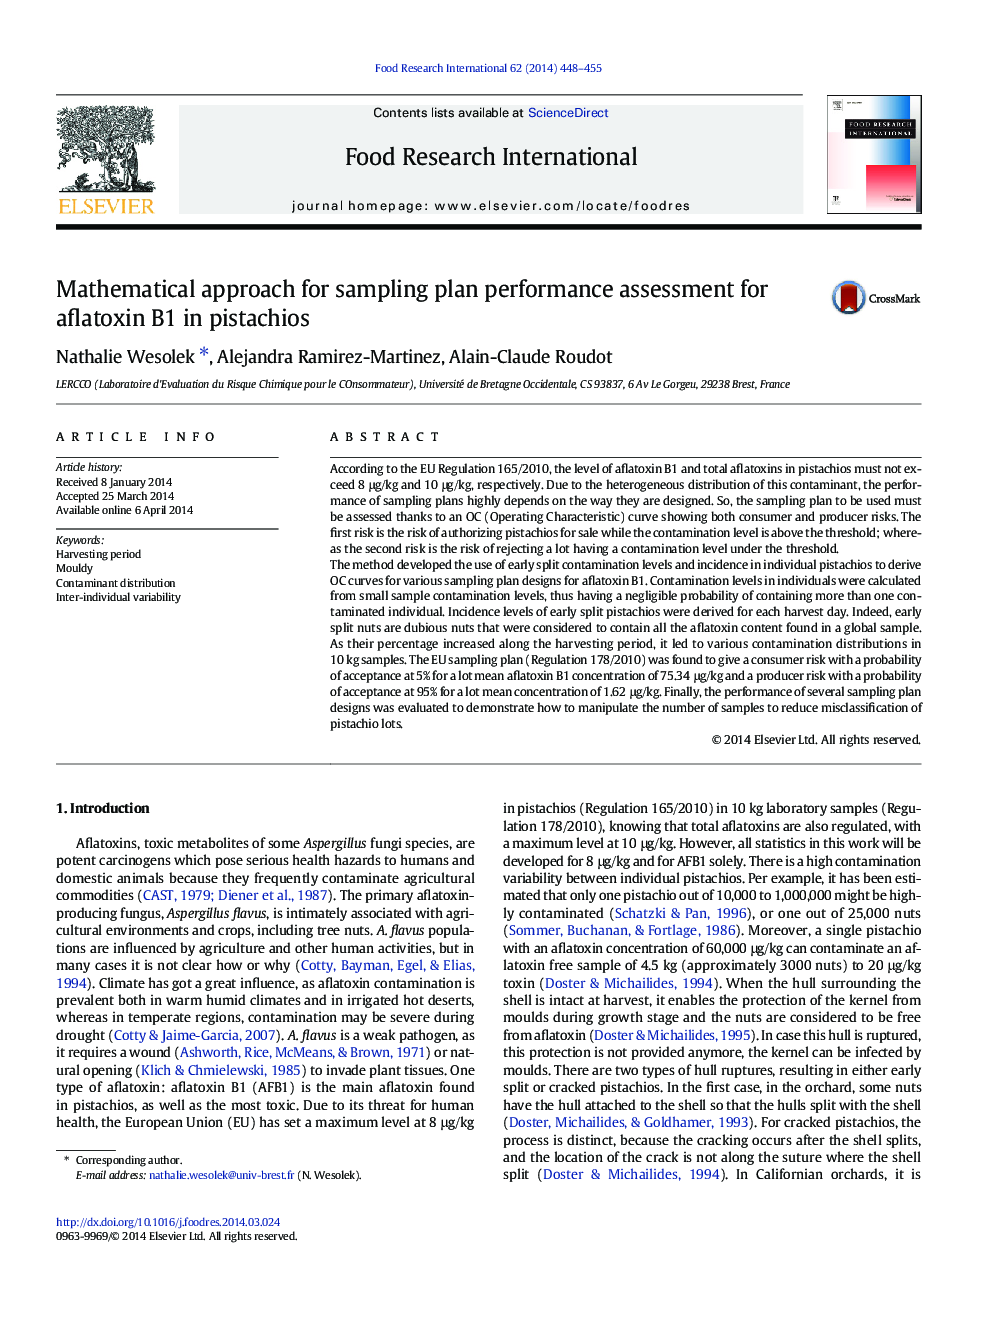 Mathematical approach for sampling plan performance assessment for aflatoxin B1 in pistachios